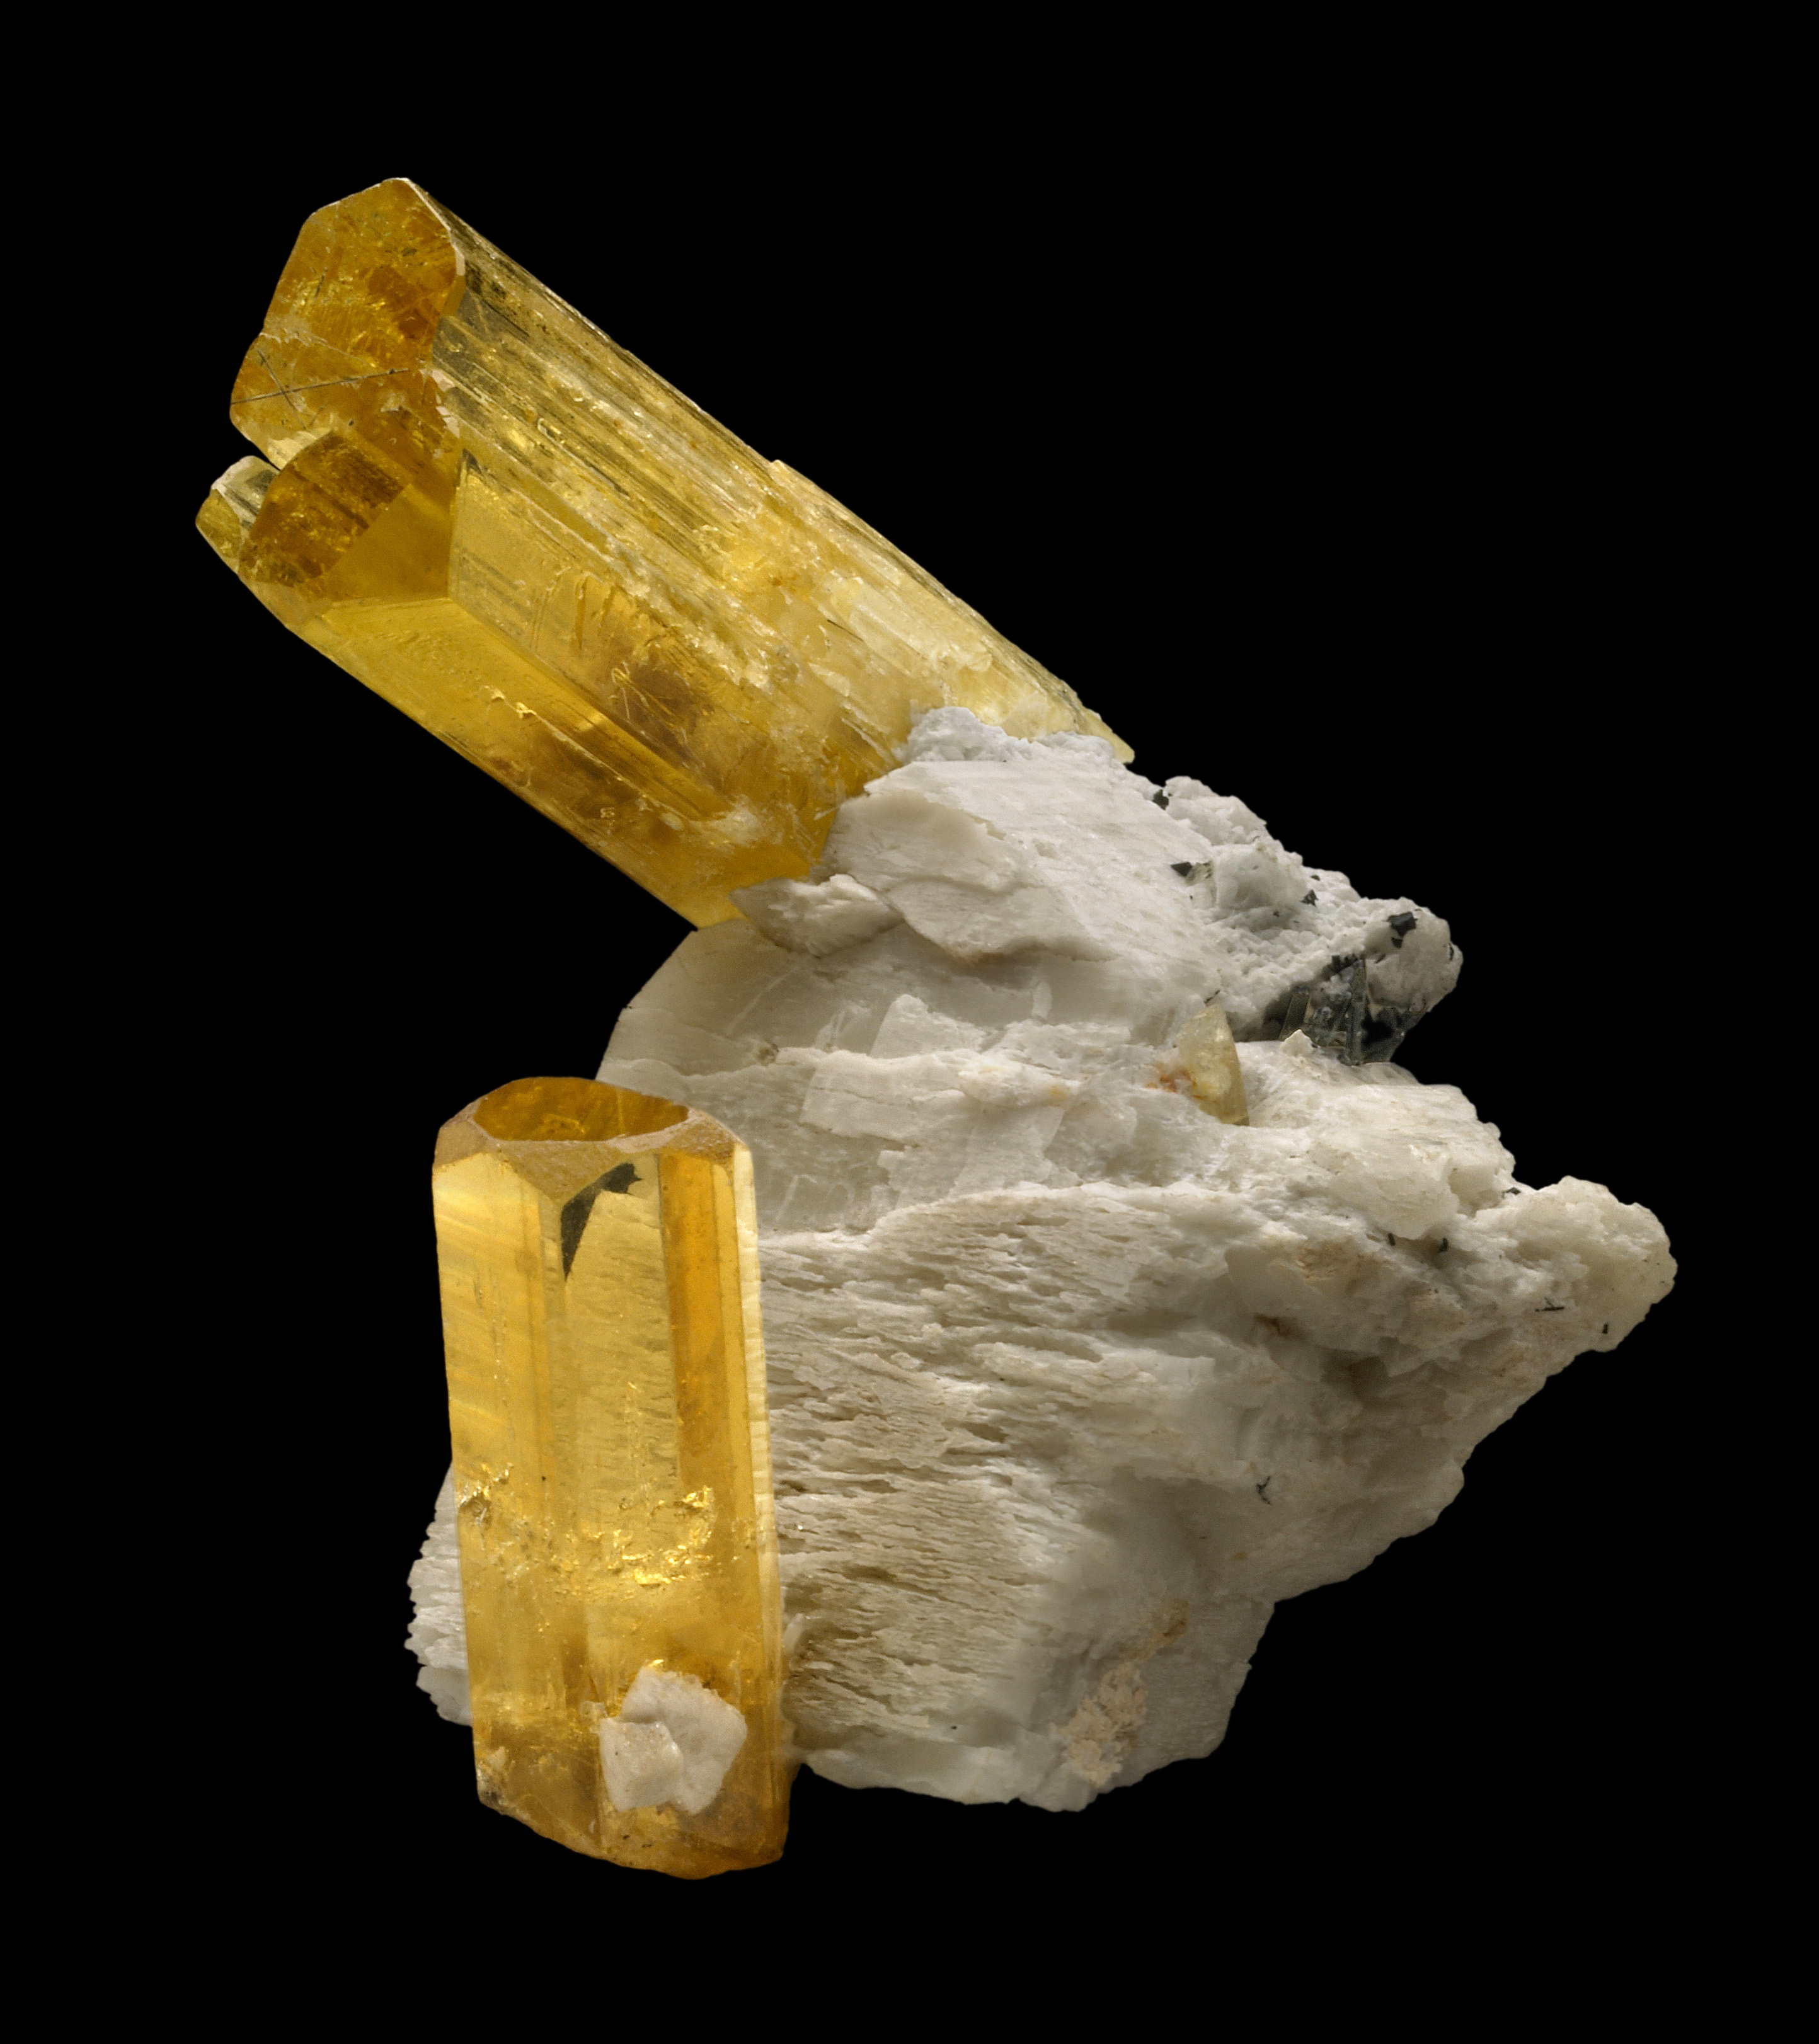 Two gold-colored natural crystals of heliodor projecting from a Feldspar matrix.